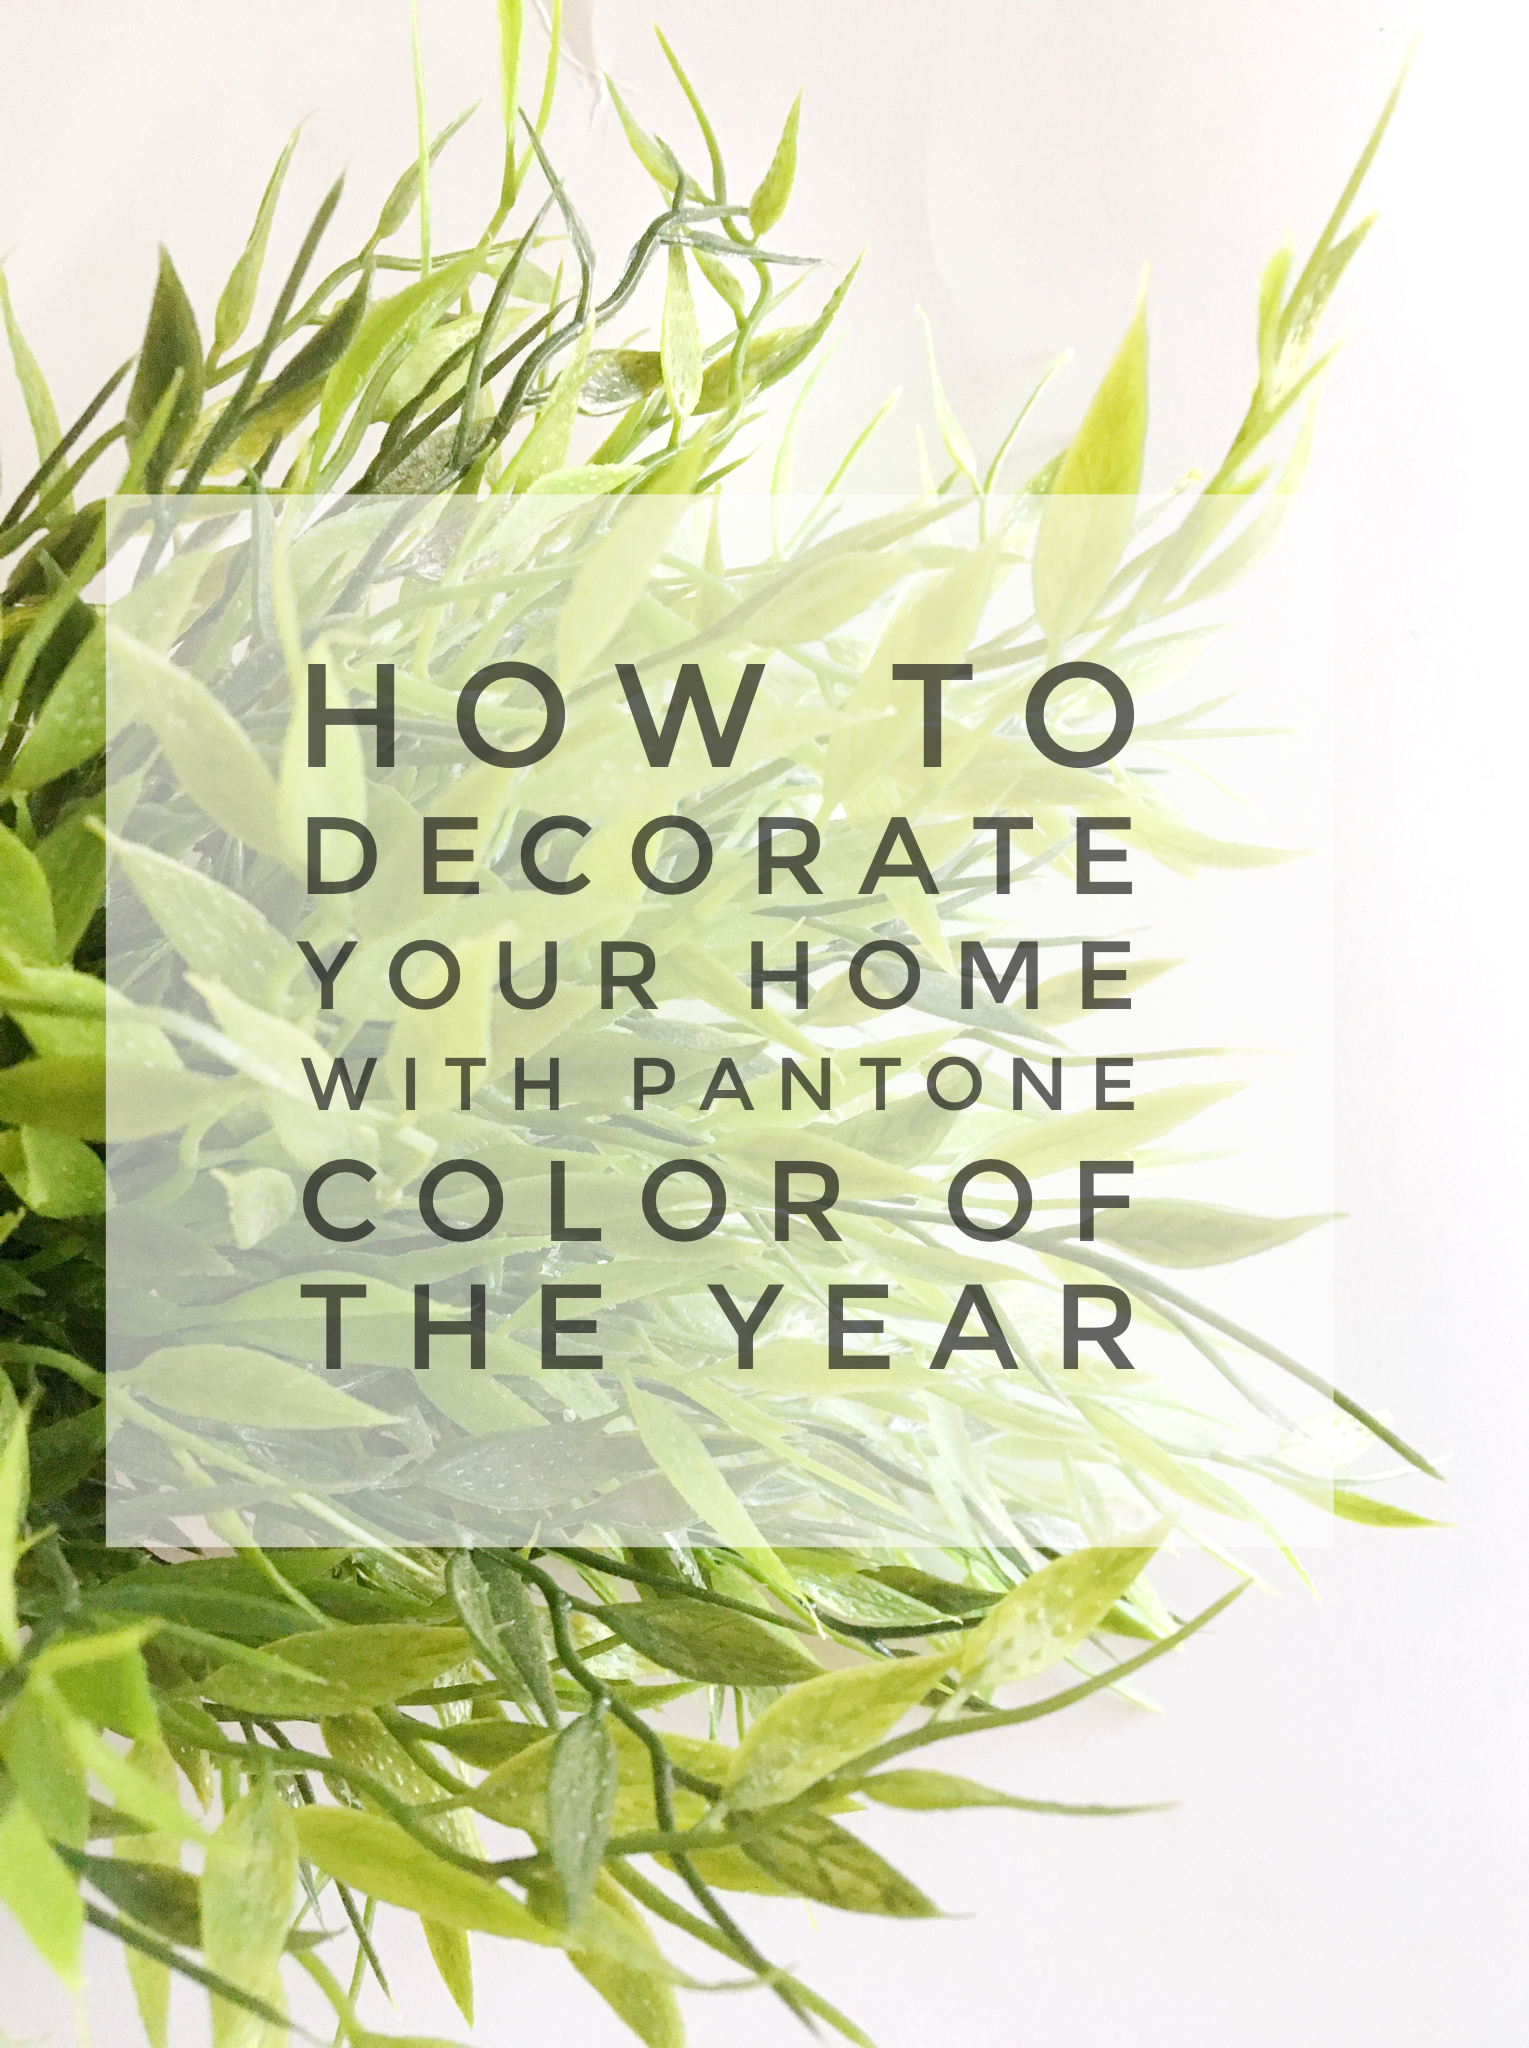 How to decorate your home with Pantone Color of the Year, Greenery